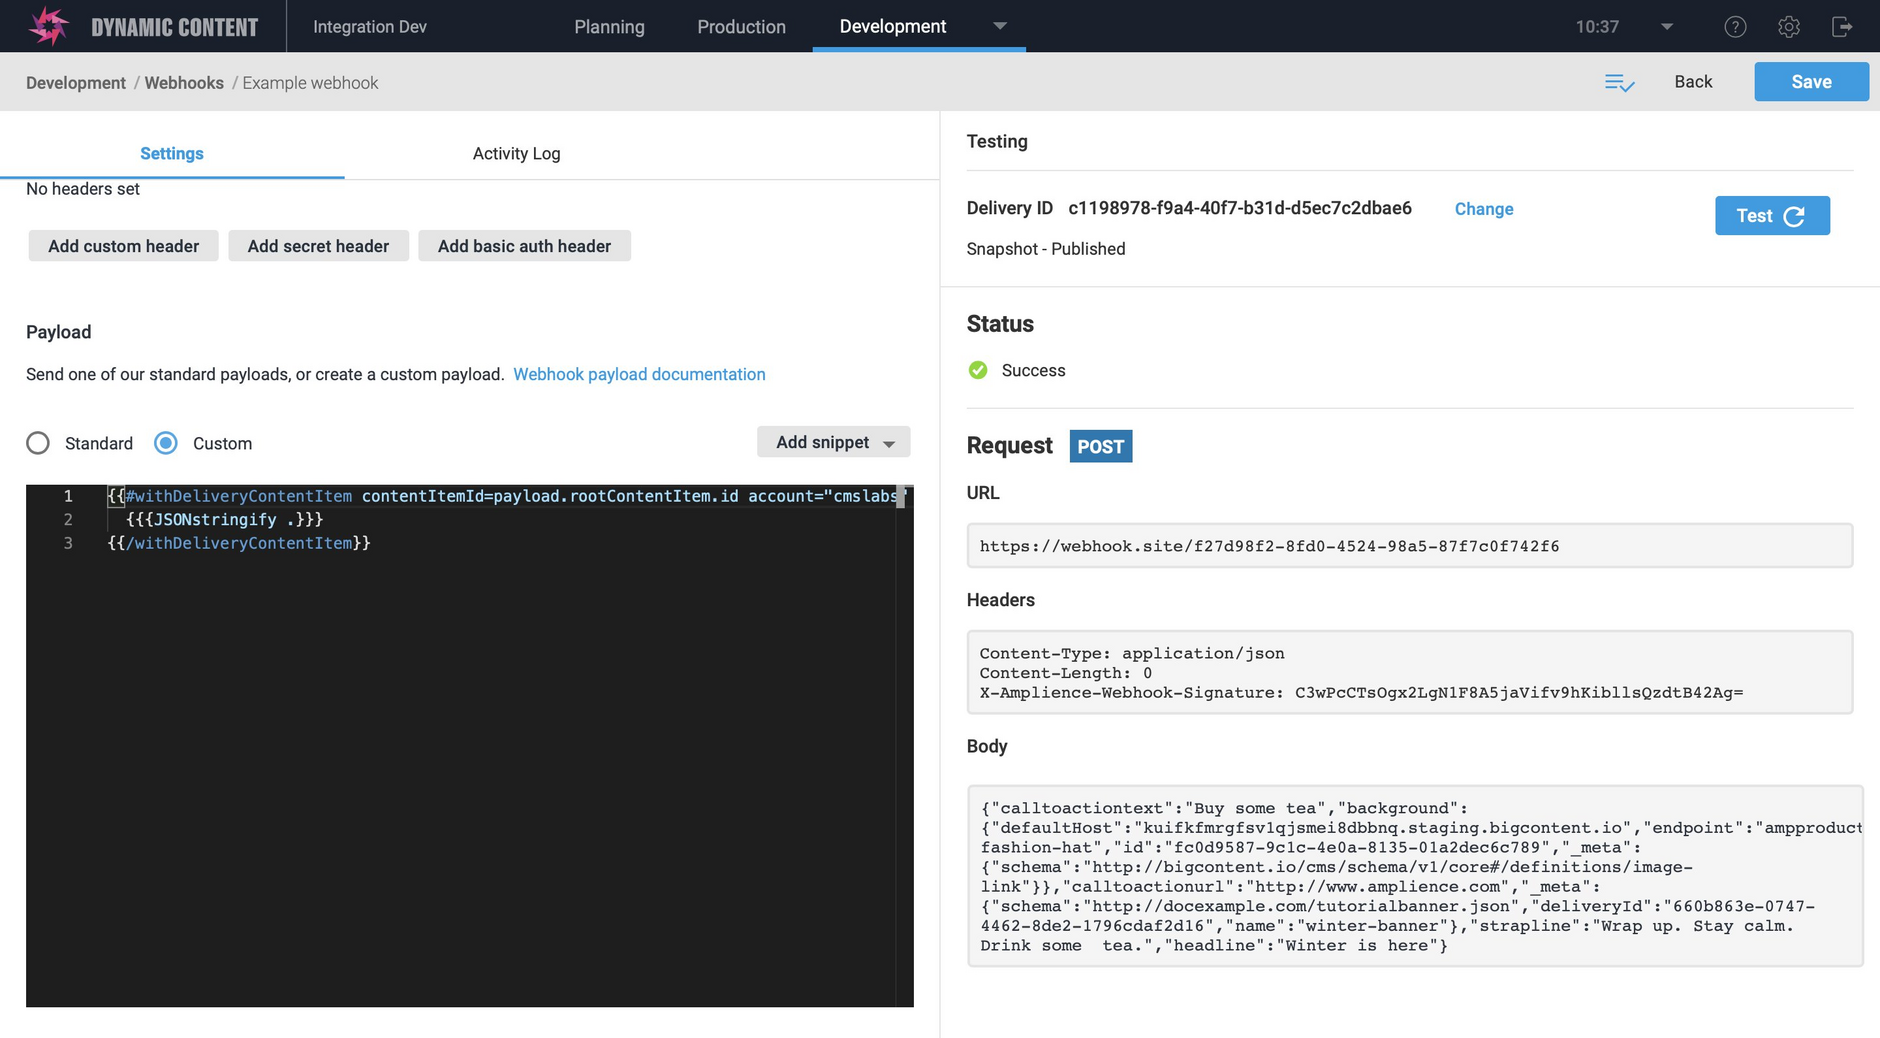 The webhook is invoked in testing mode and no request is sent to the webhook URL